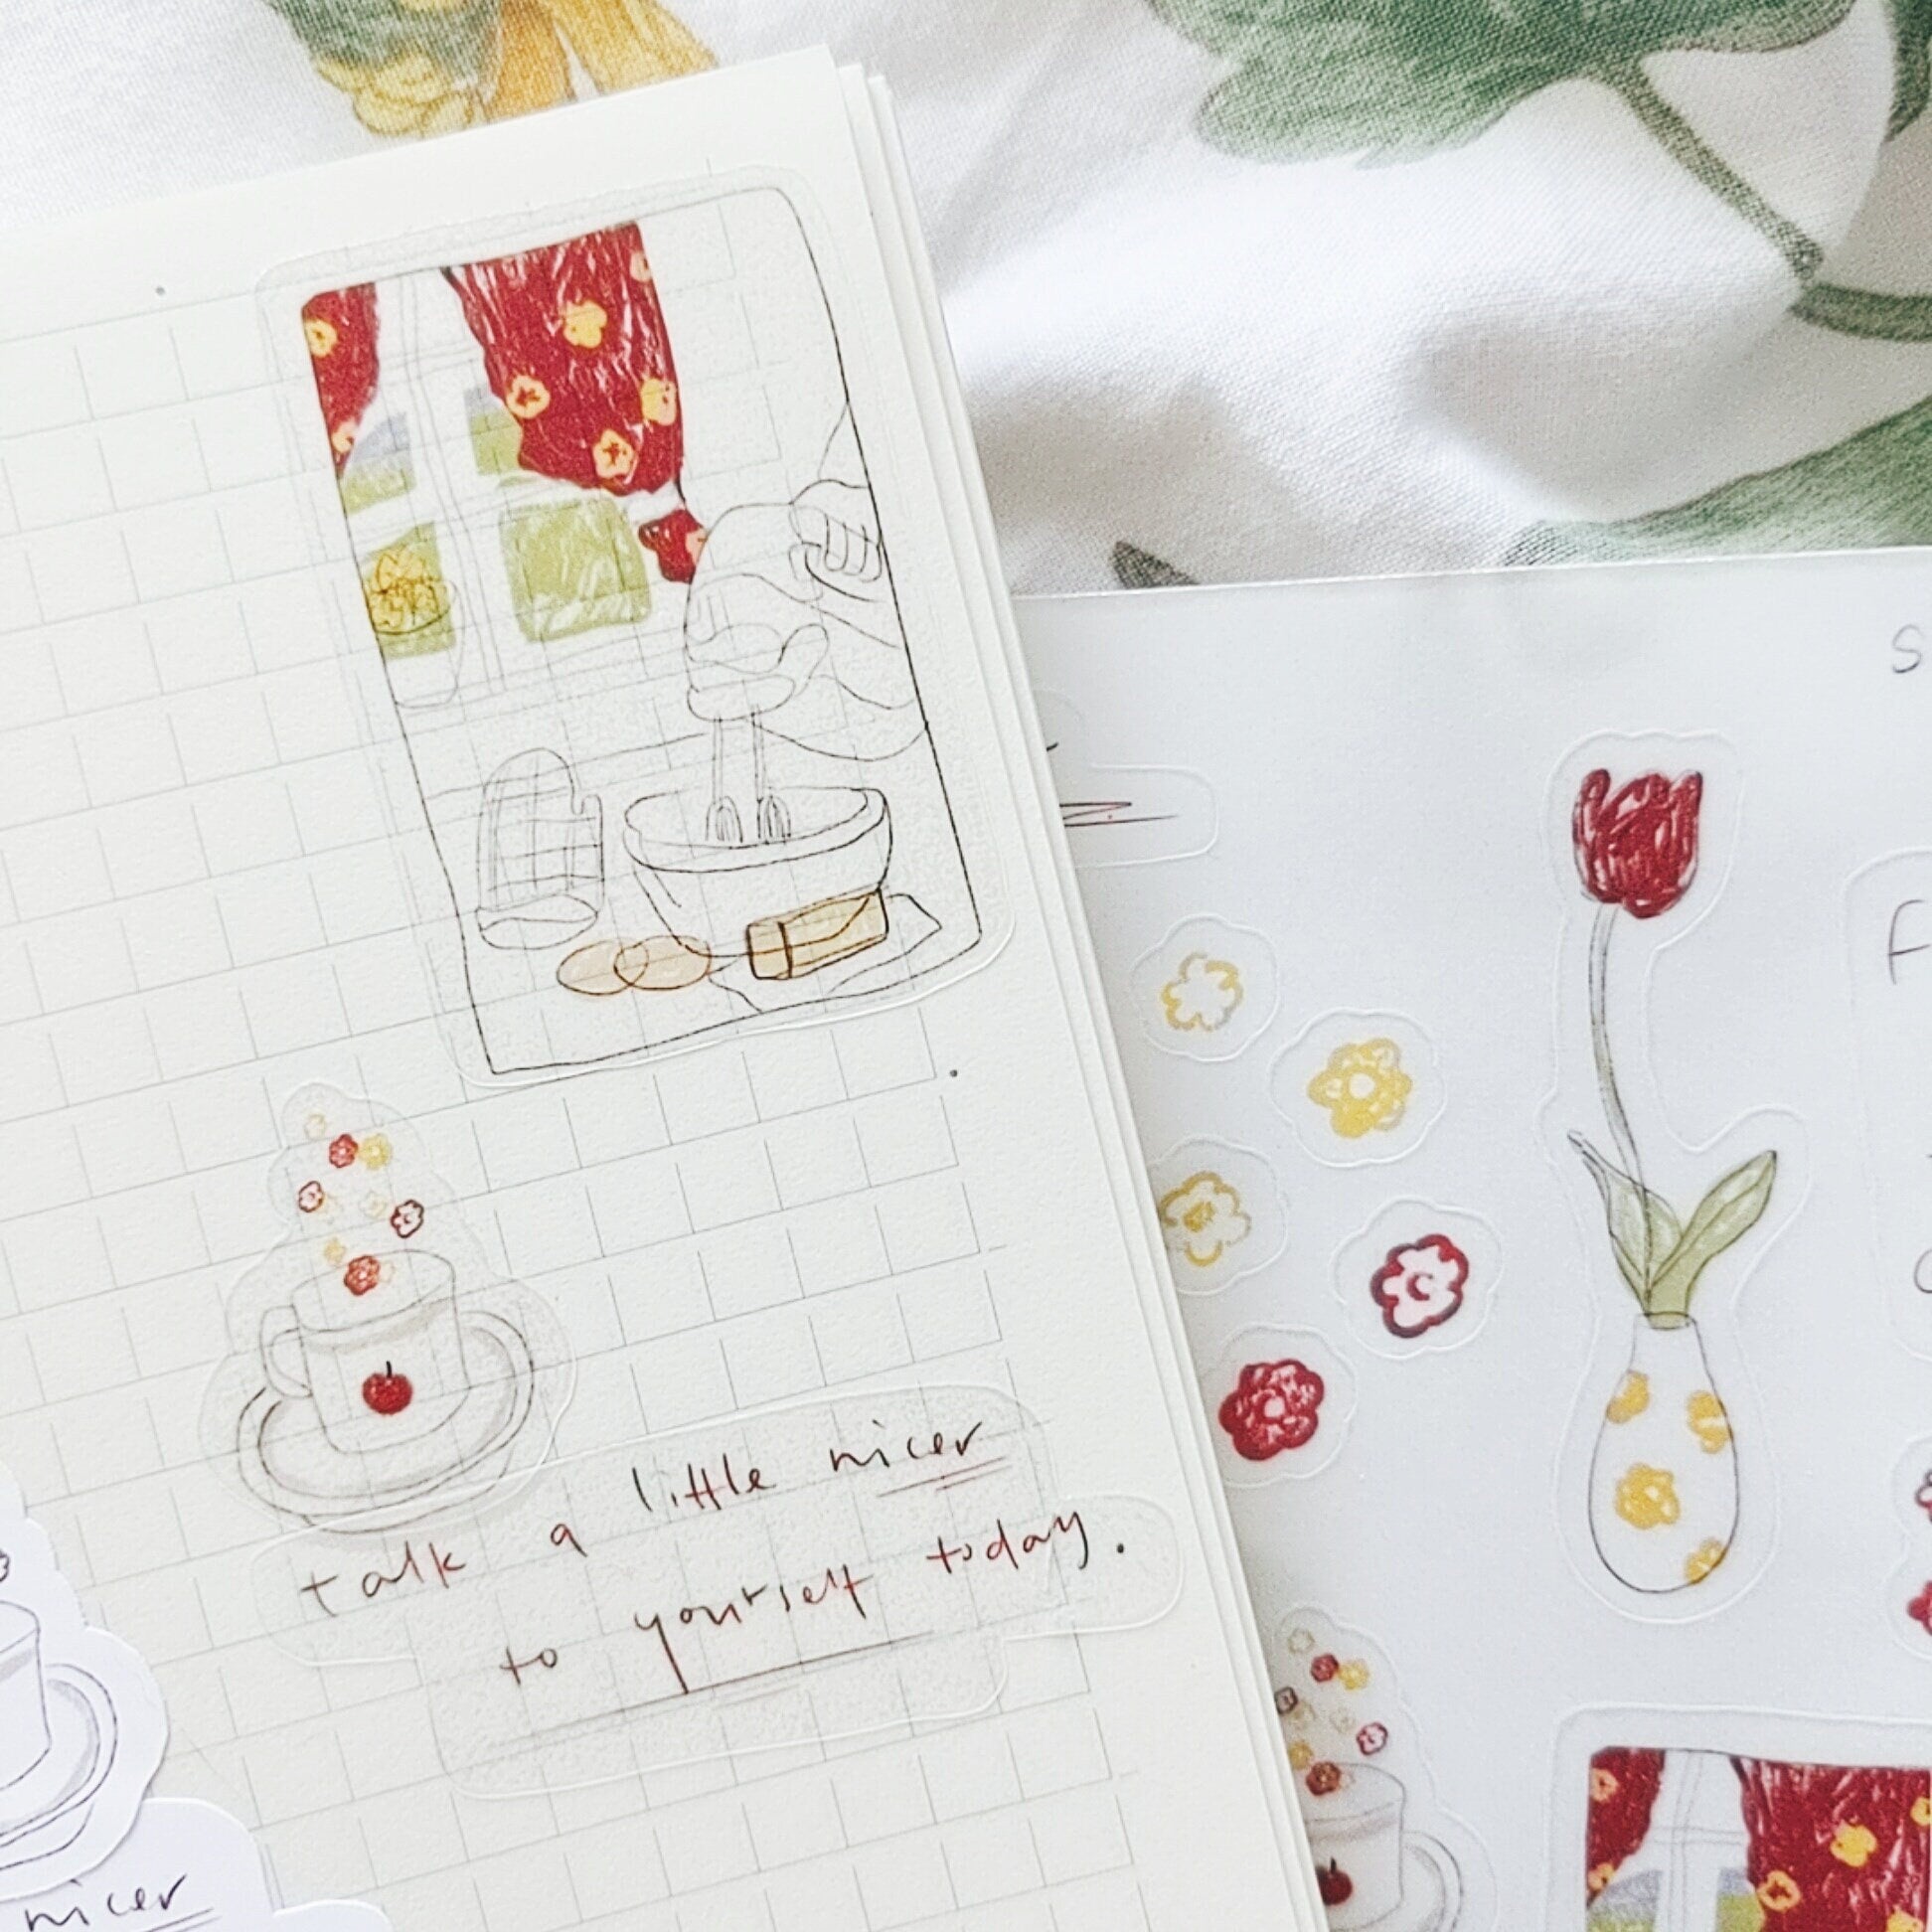 sticker sheet | take a day off | self-care | baking | talk a little nicer to yourself